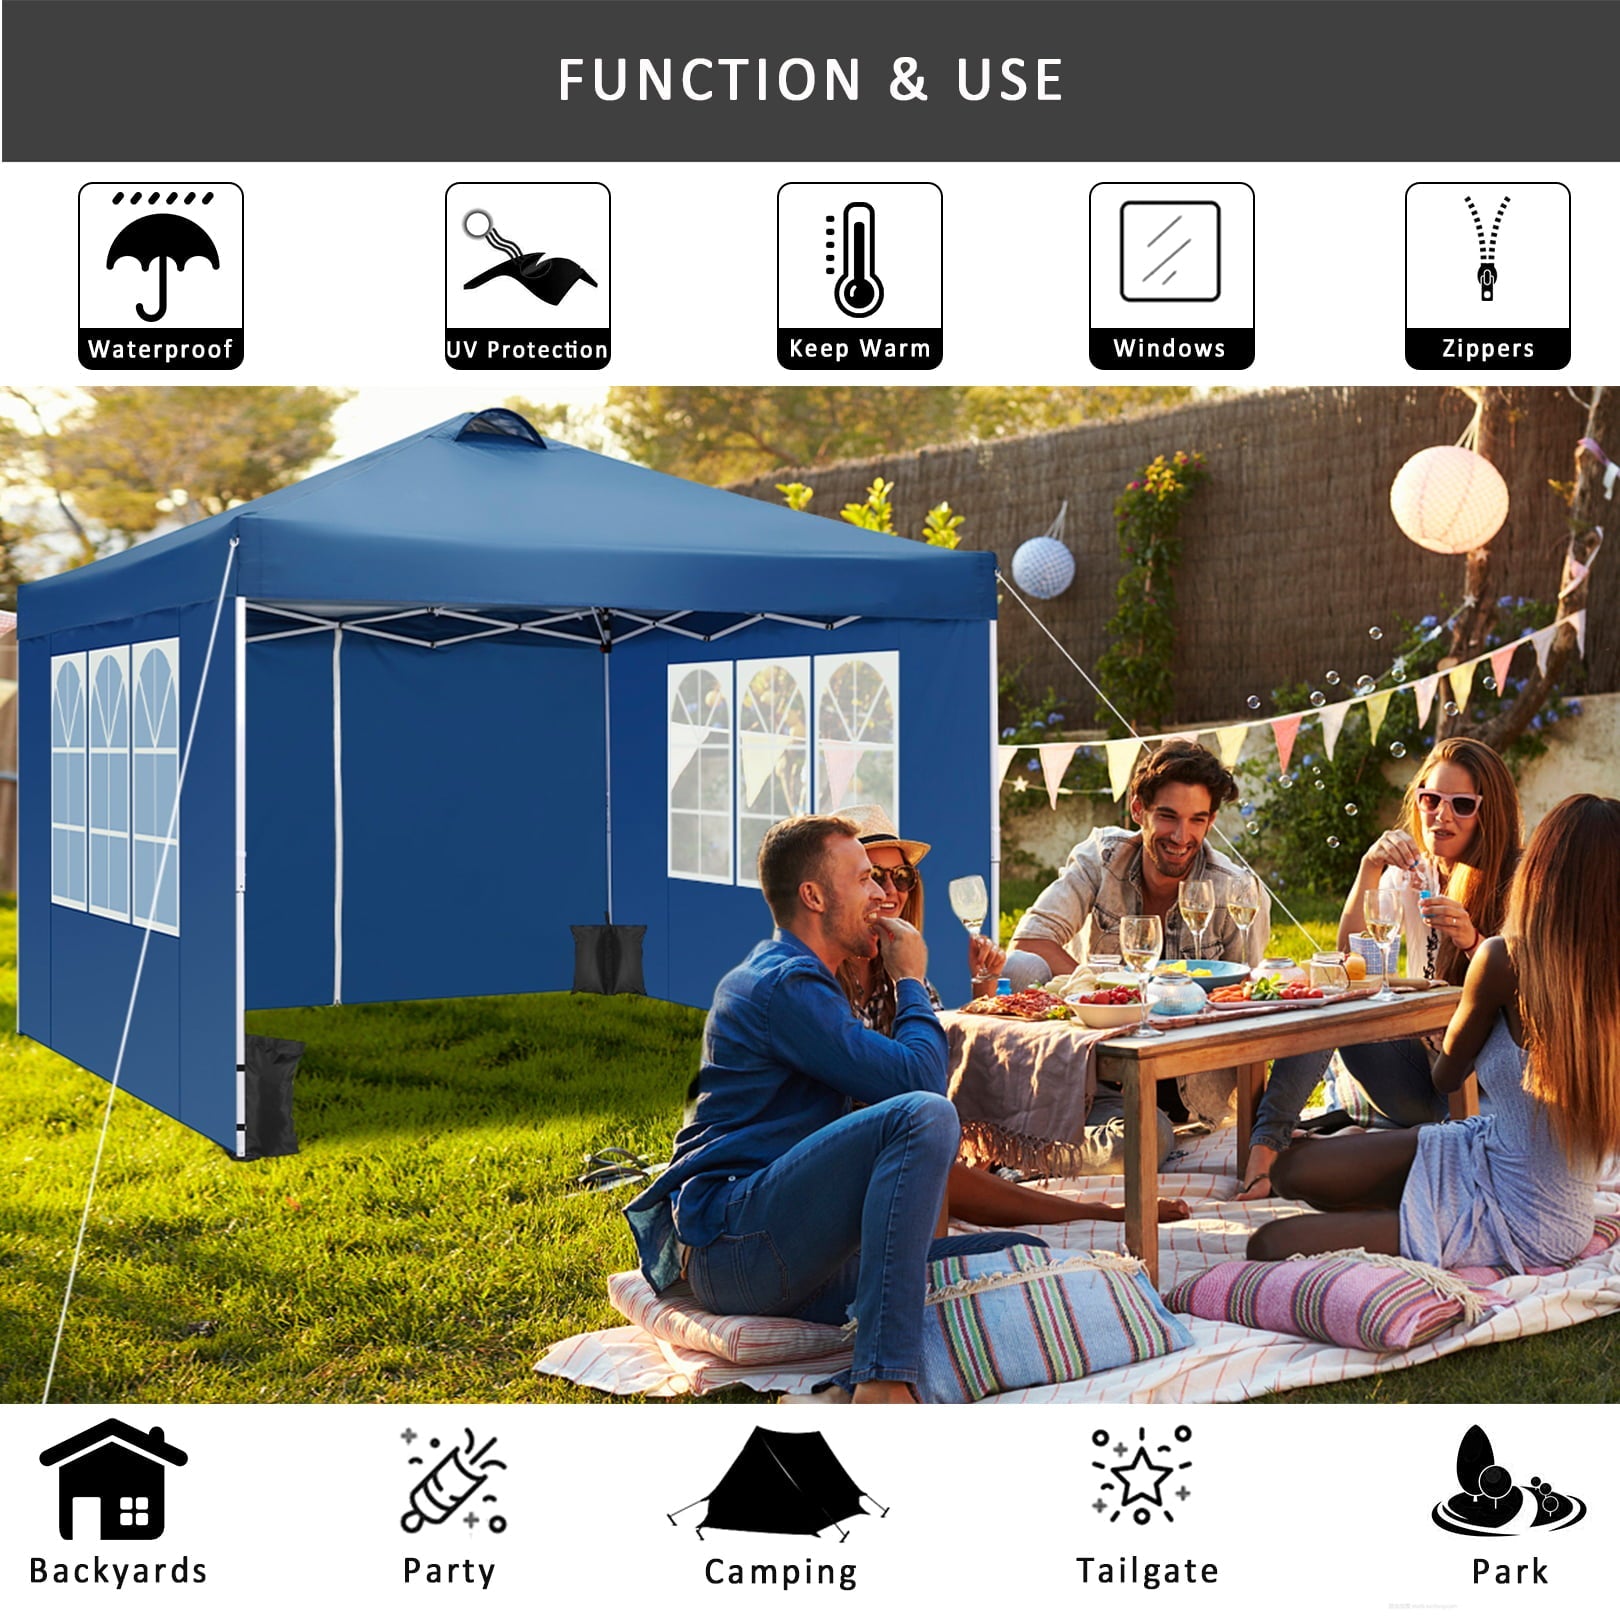 10' x 10' Straight Leg Pop-up Canopy Tent Easy One Person Setup Instant Outdoor Canopy Folding Shelter with 4 Removable Sidewalls, Air Vent on The Top, 4 Sandbags, Carrying Bag, Blue